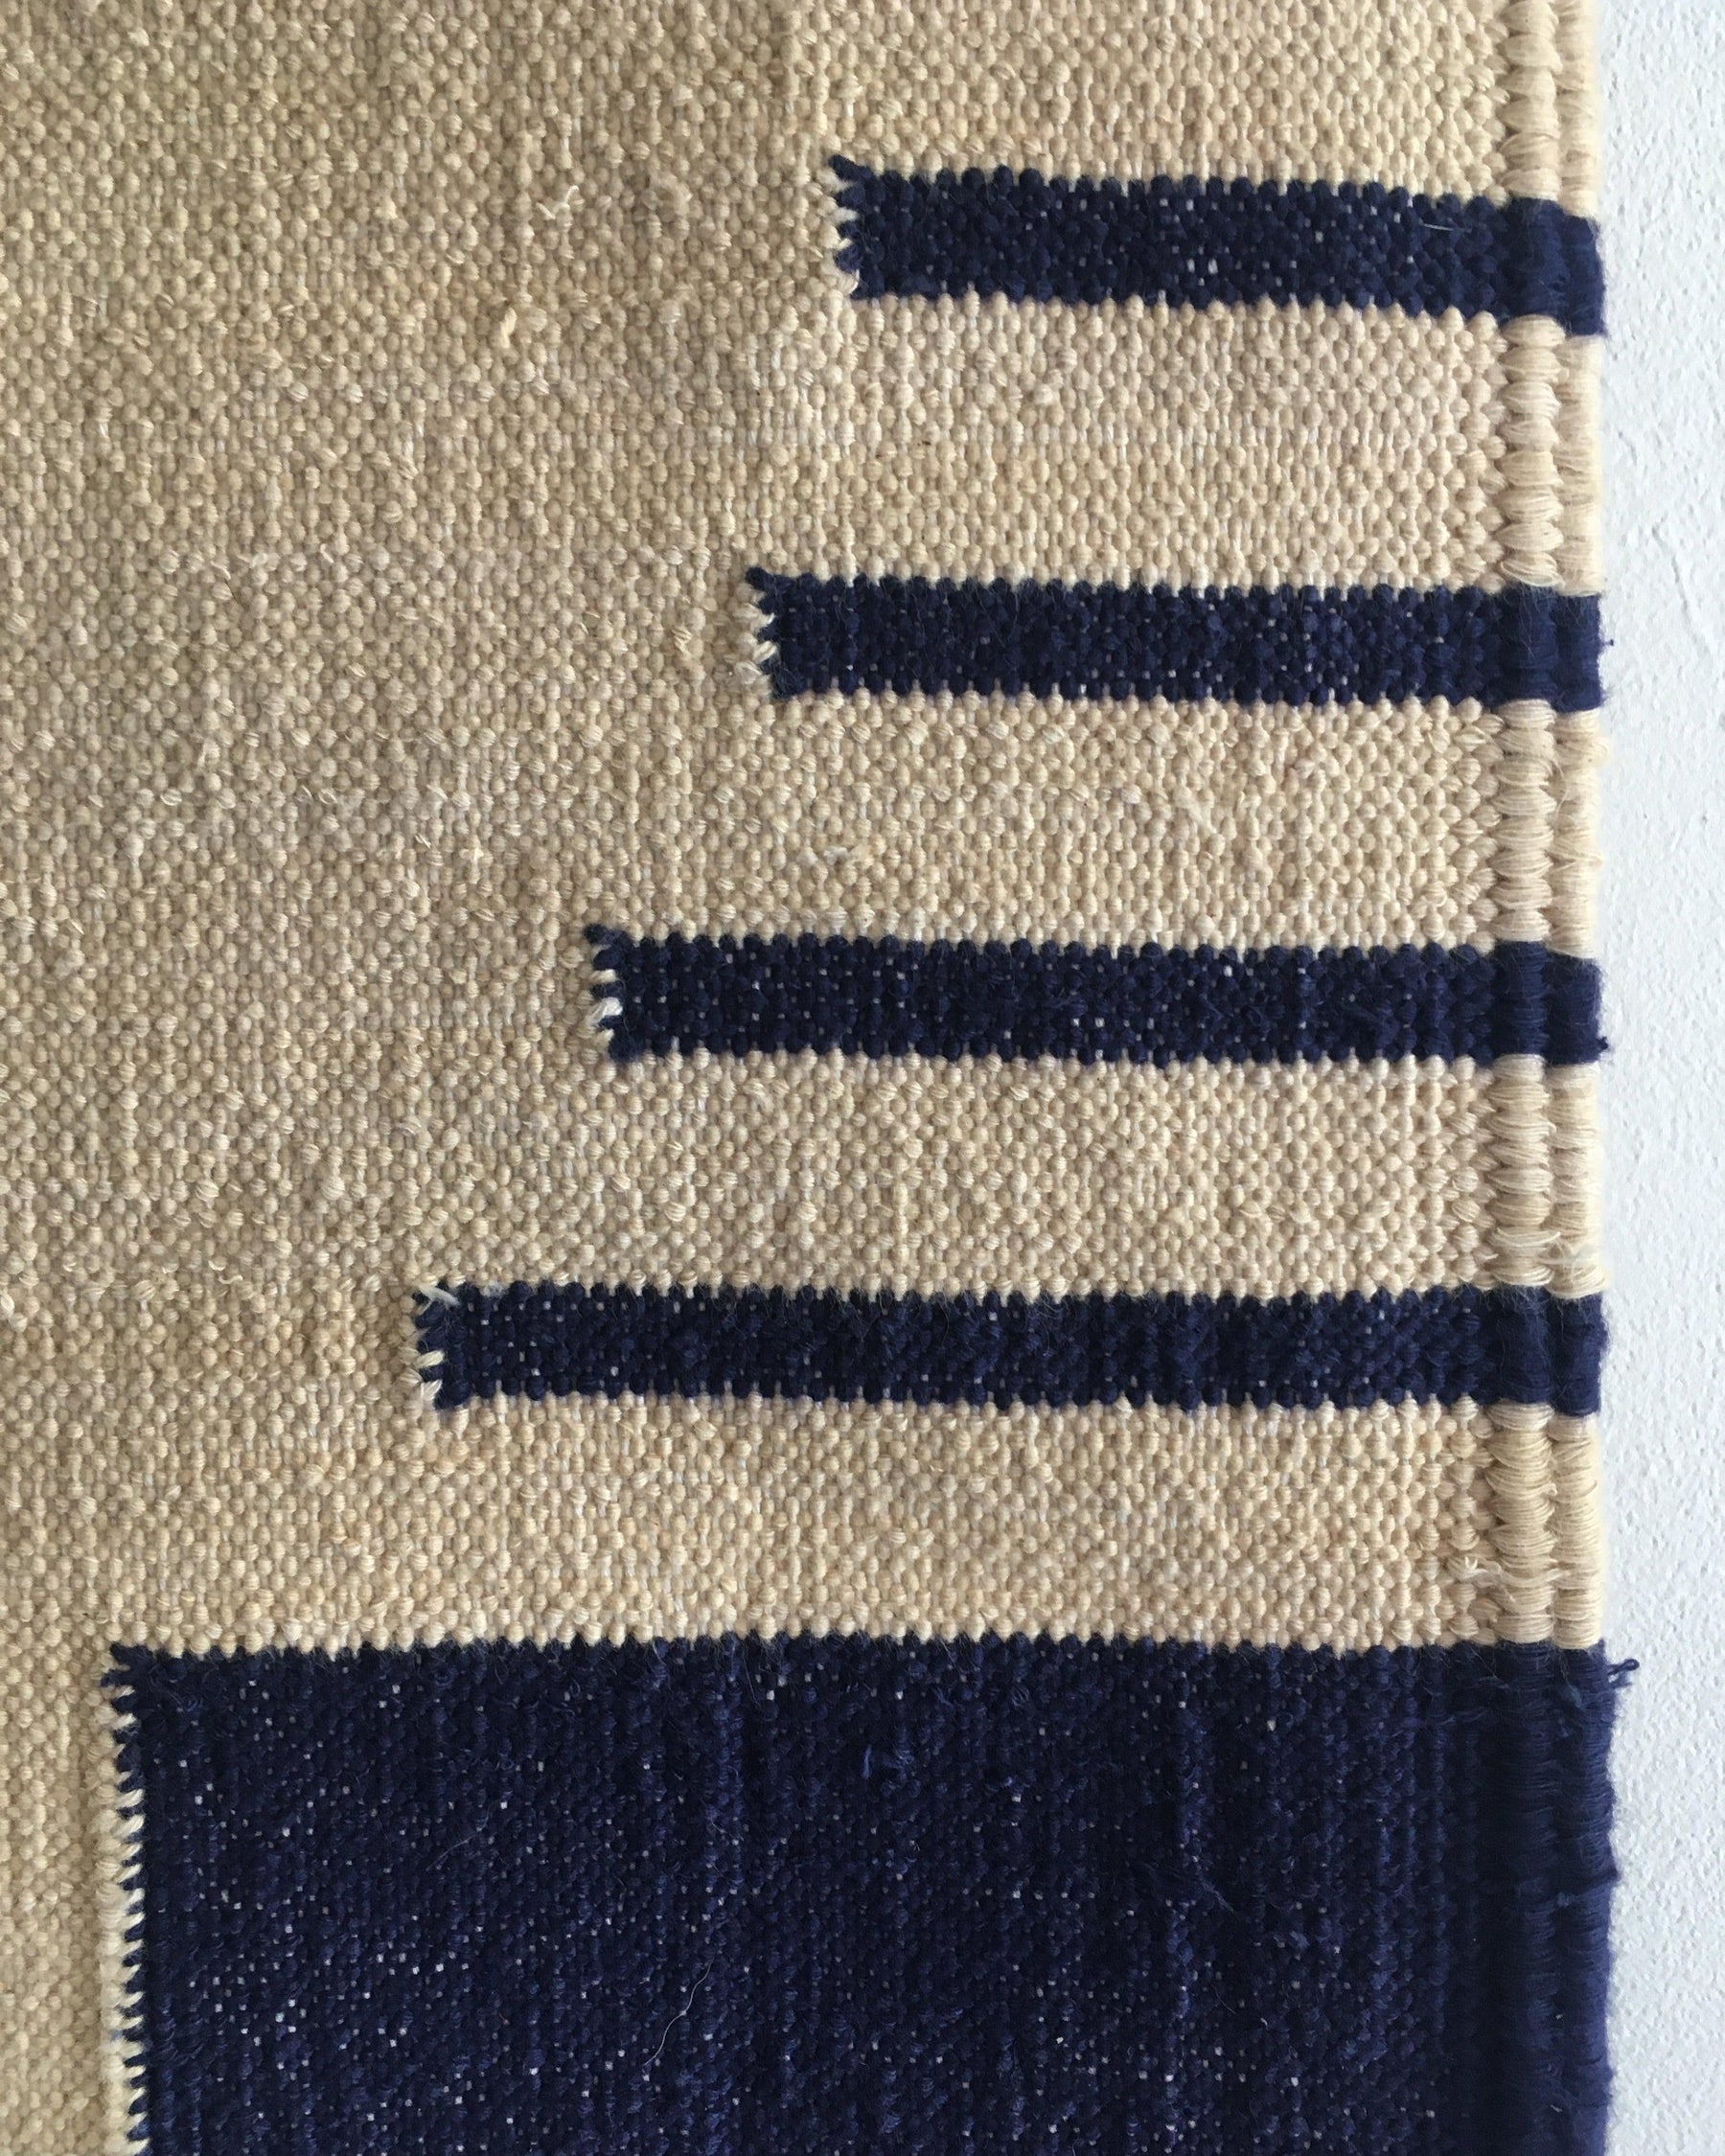 Desert Blues Rug - Handwoven cotton dhurrie-Humphries and Begg